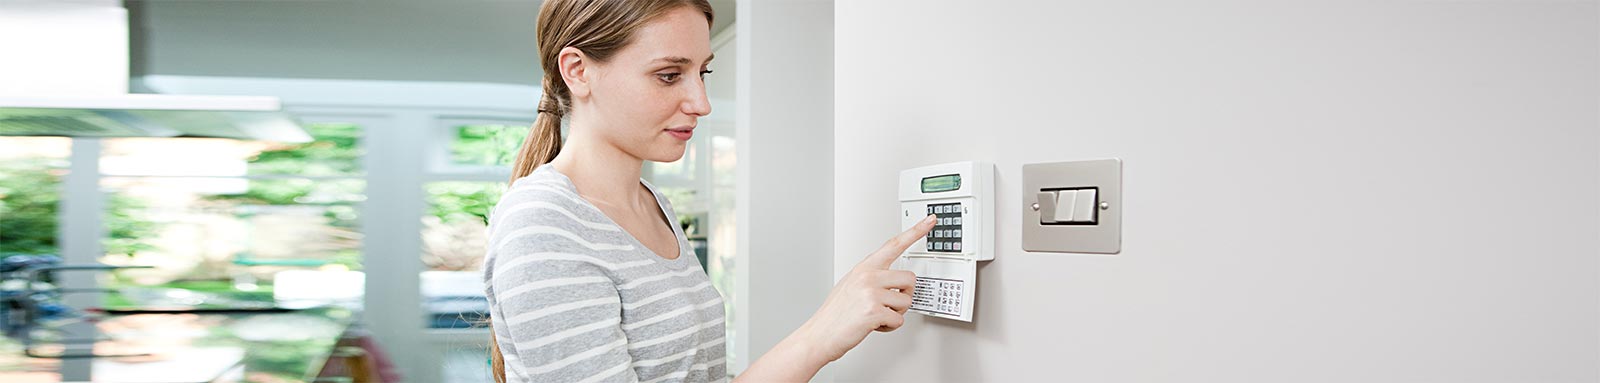 Woman setting home security device